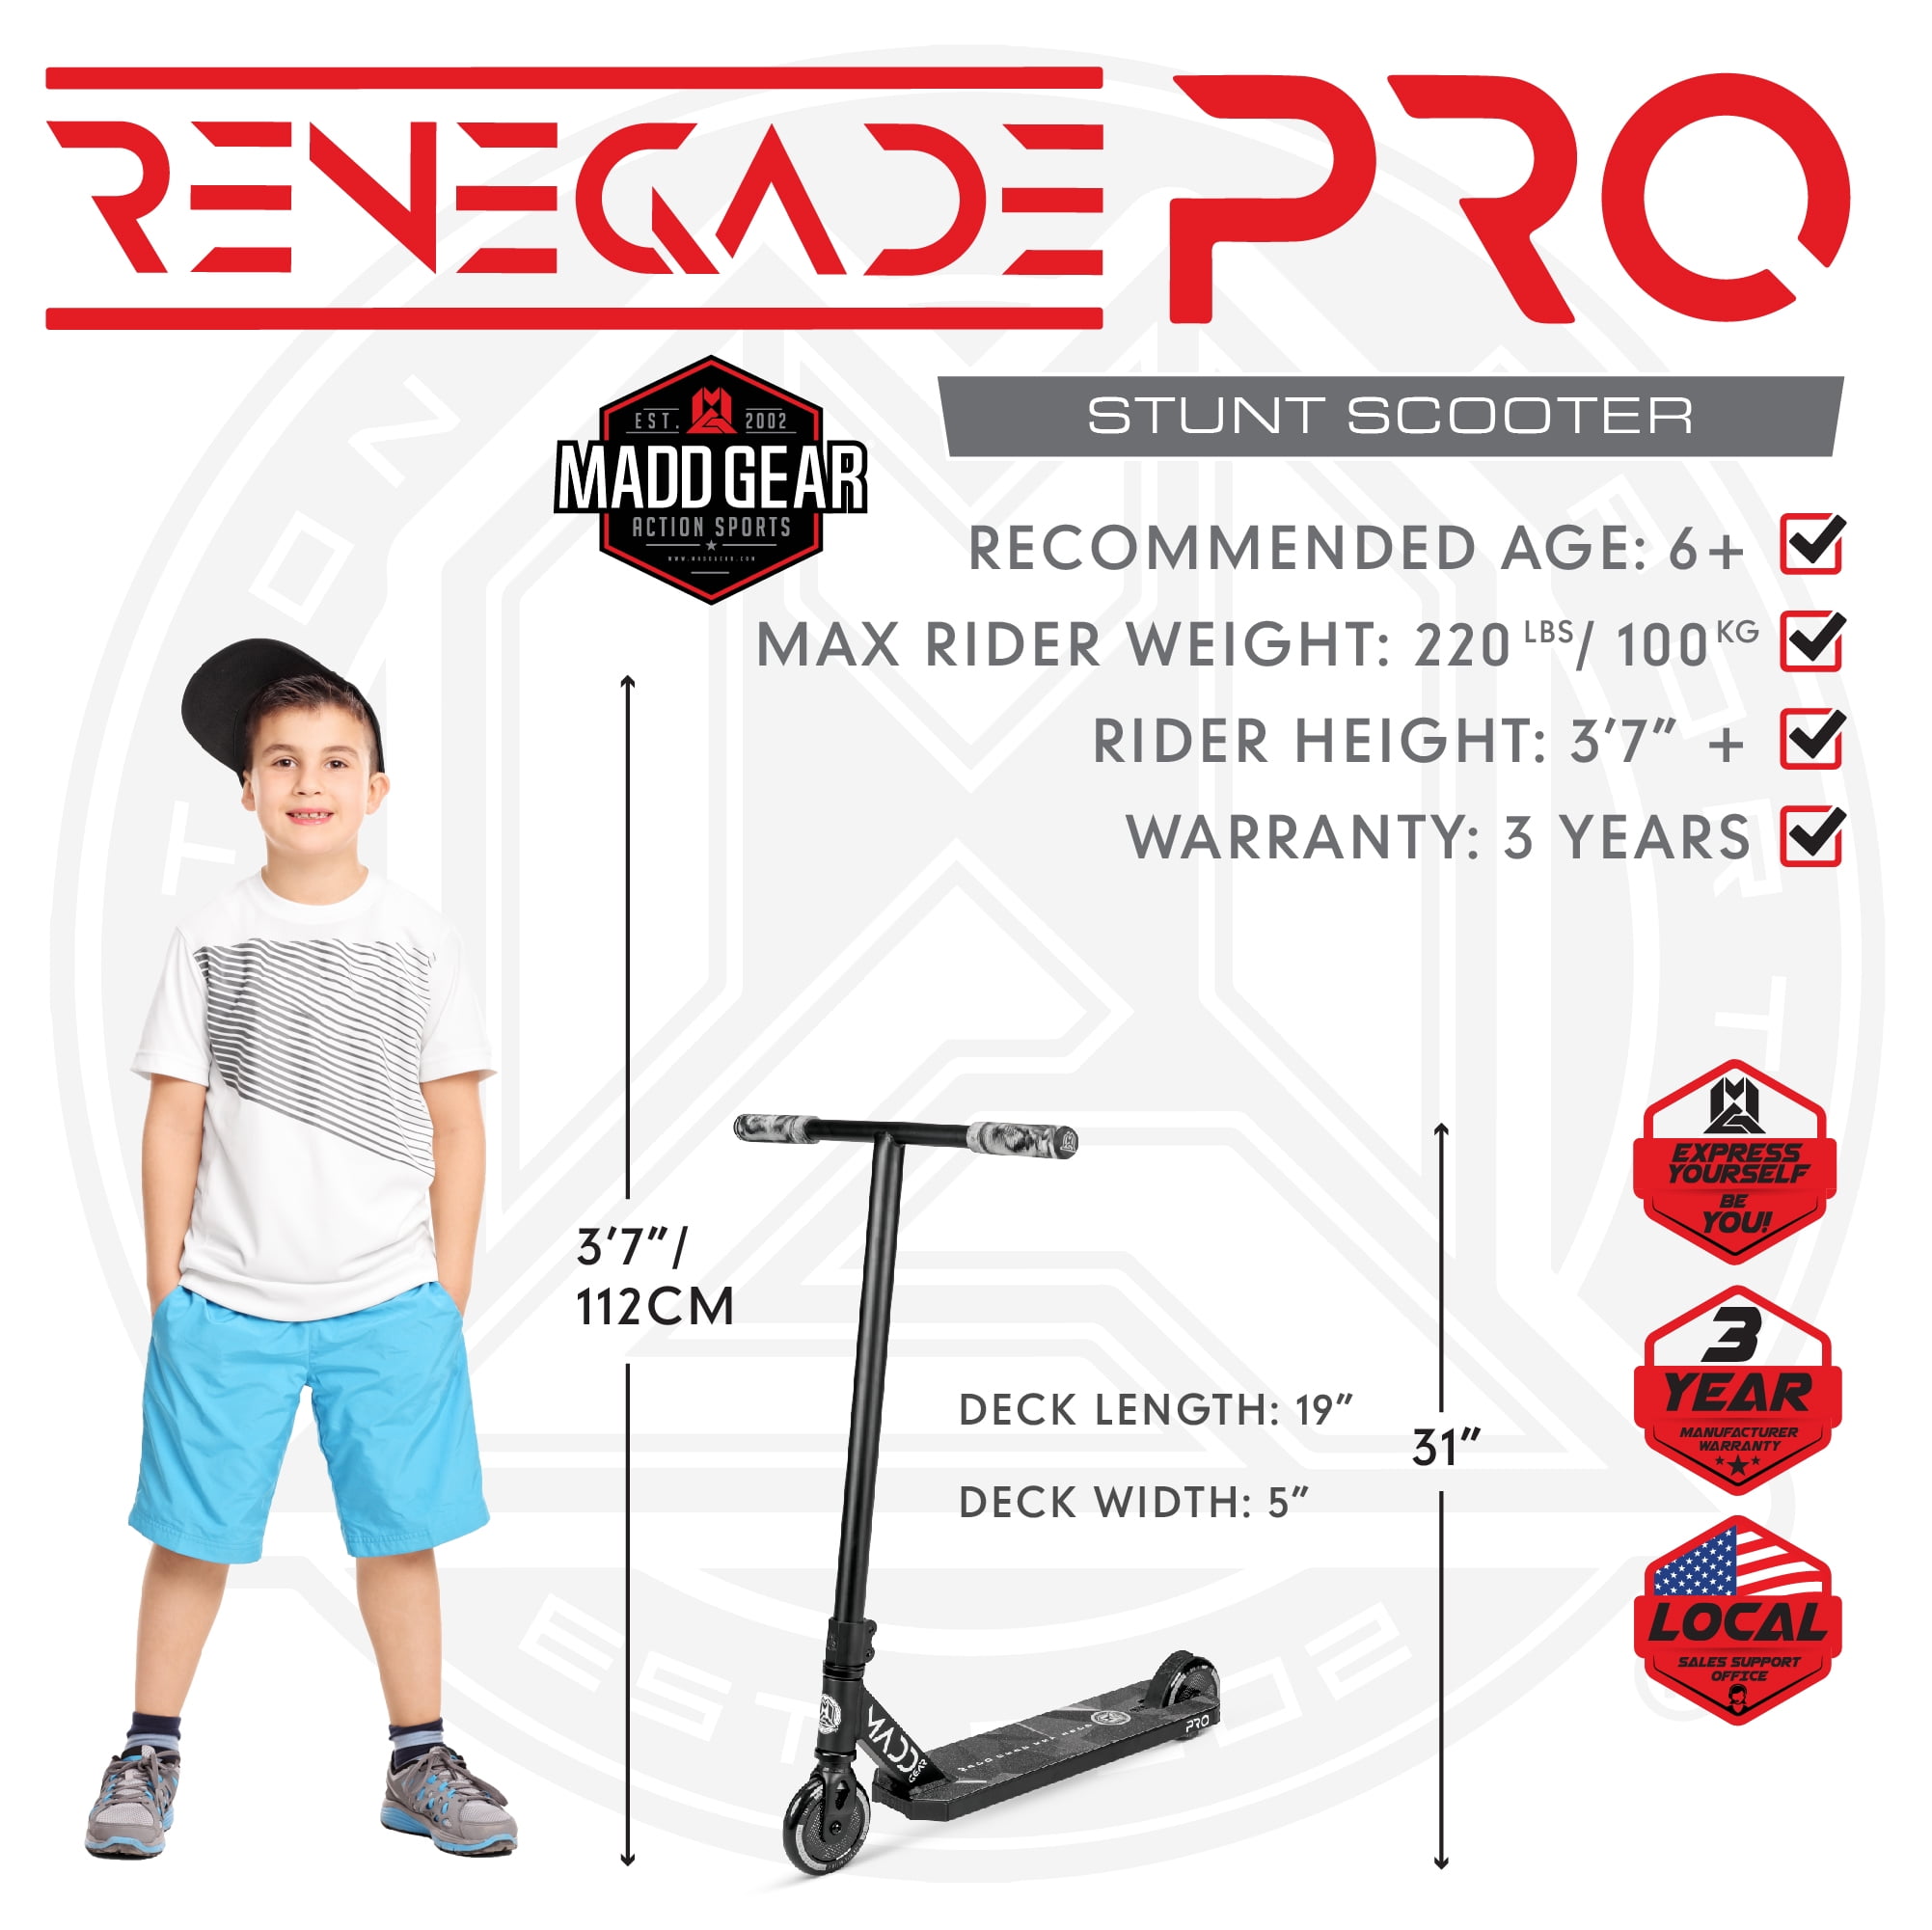 Madd Gear Renegade Pro Stunt Scooter 19.5